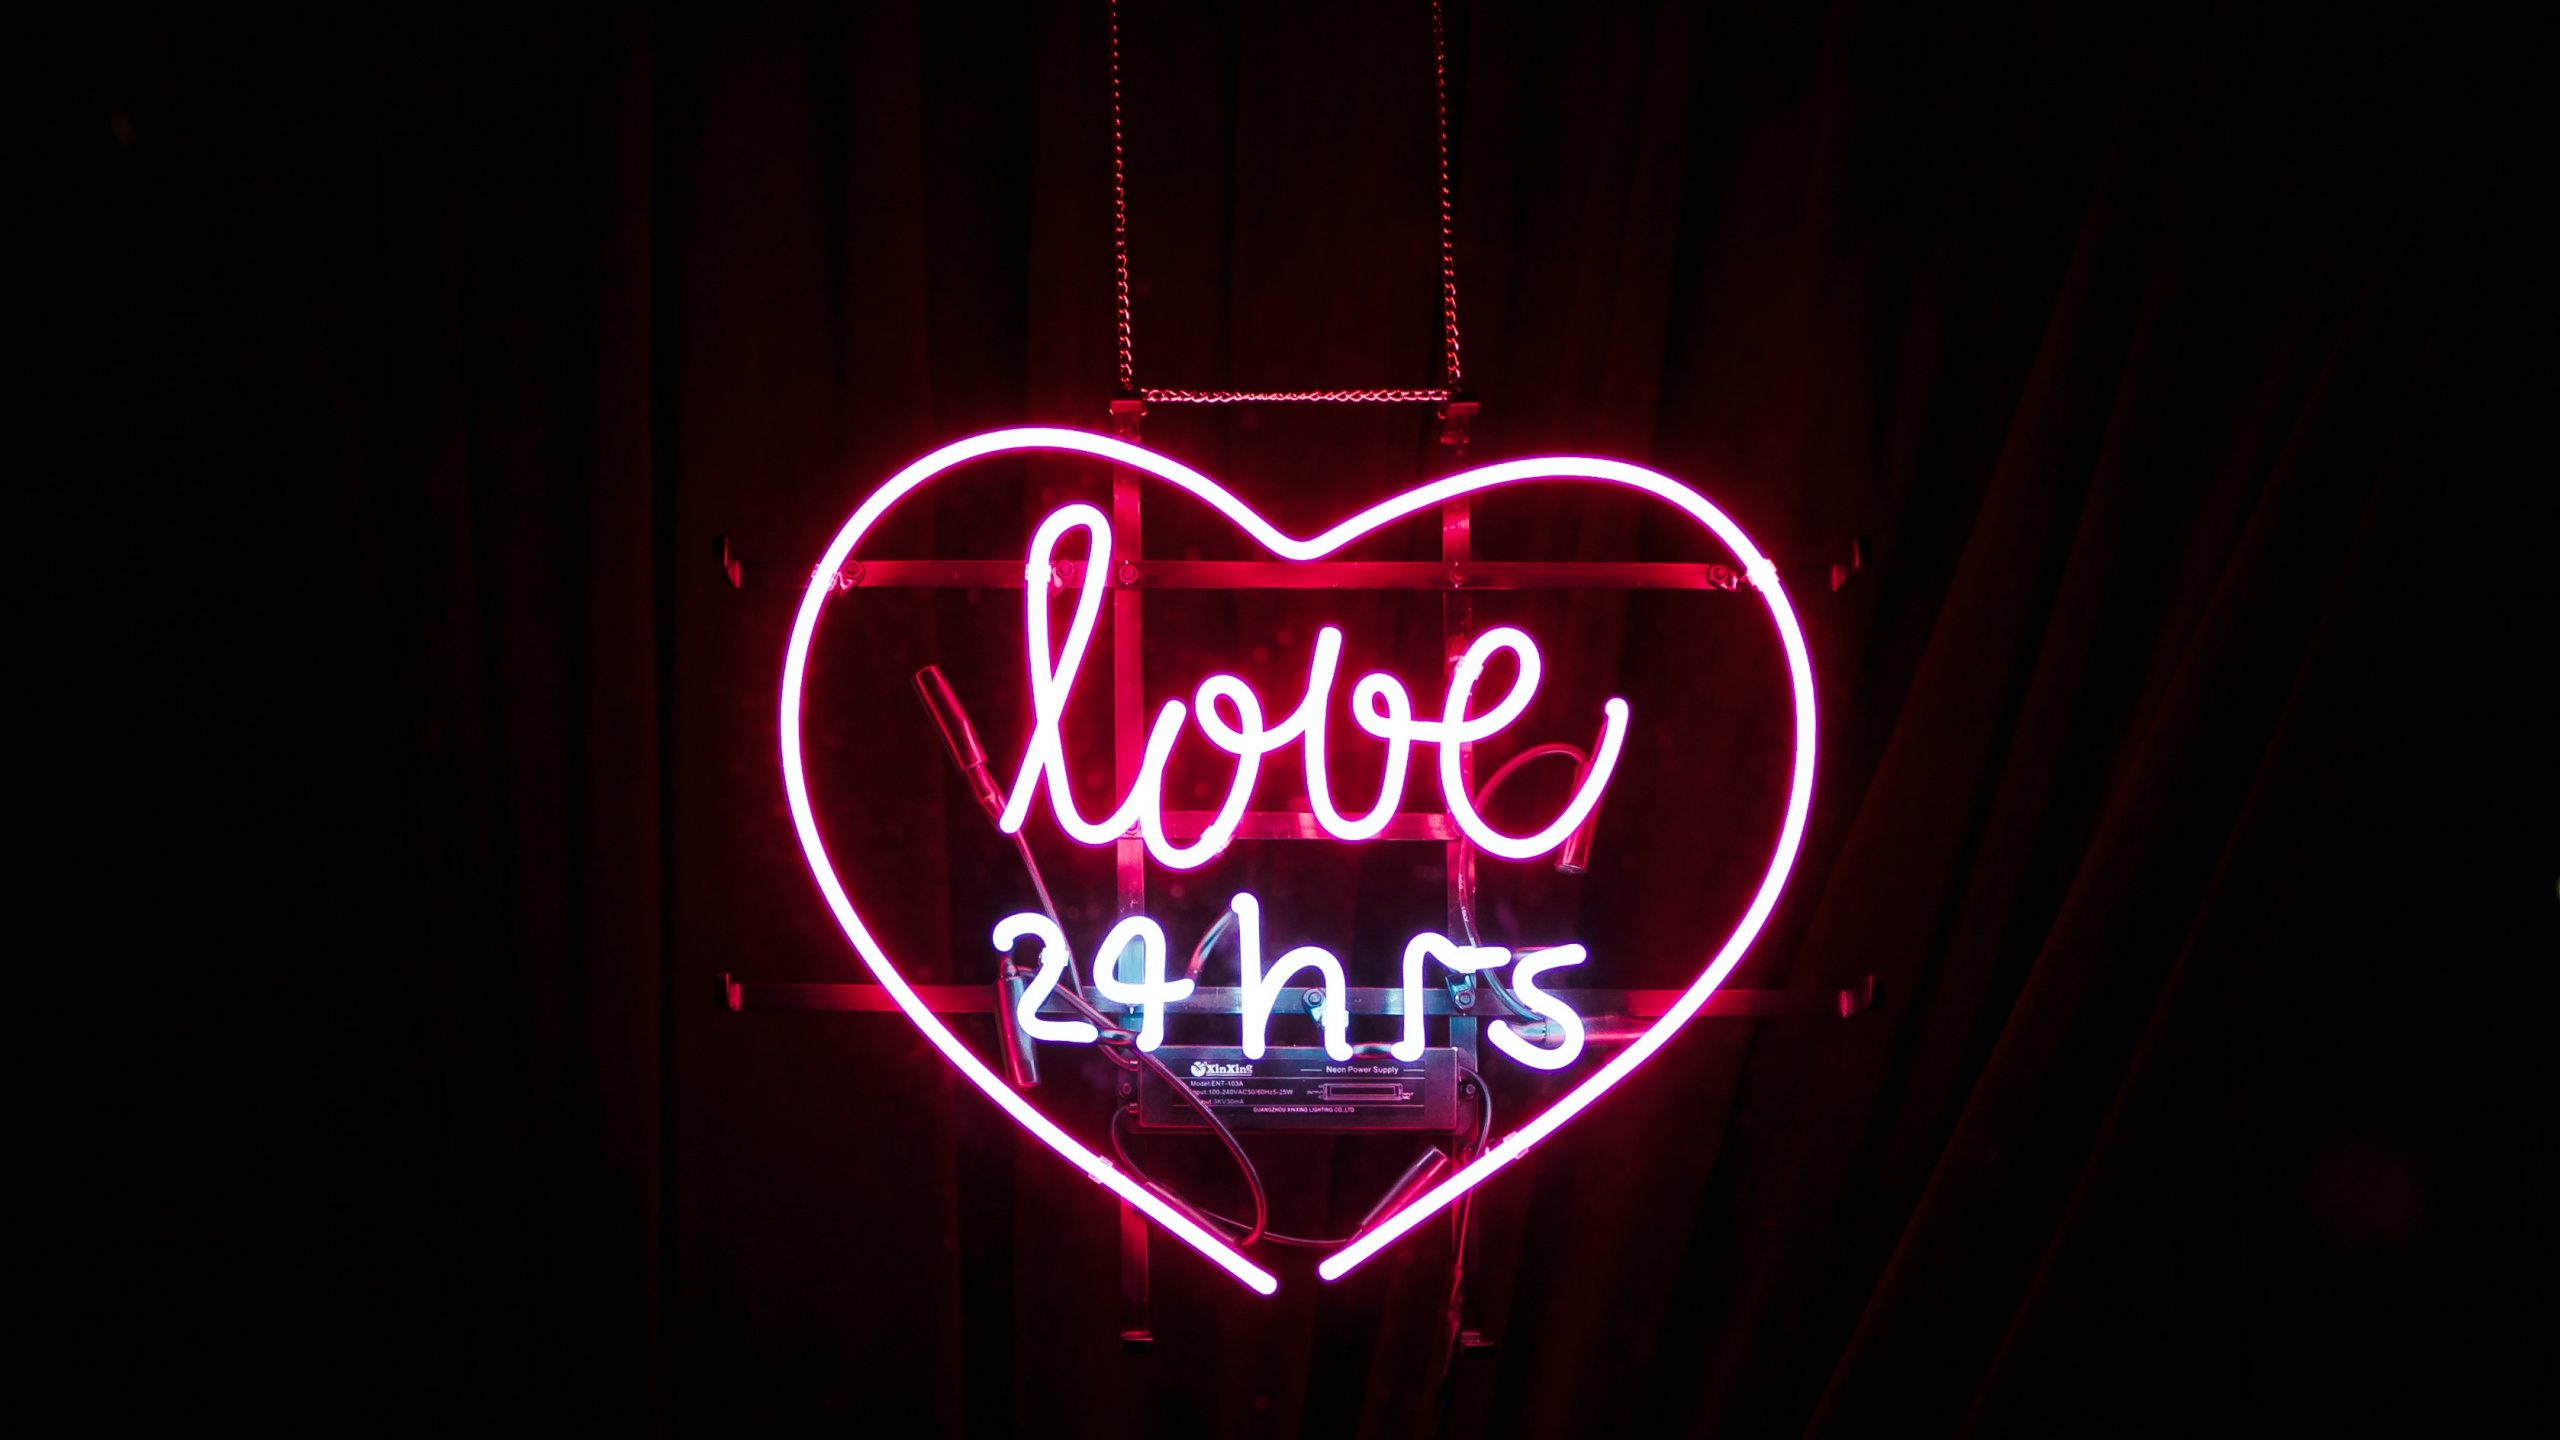 Neon Sign, Neon, Red, Light, Text. Wallpaper in 2560x1440 Resolution